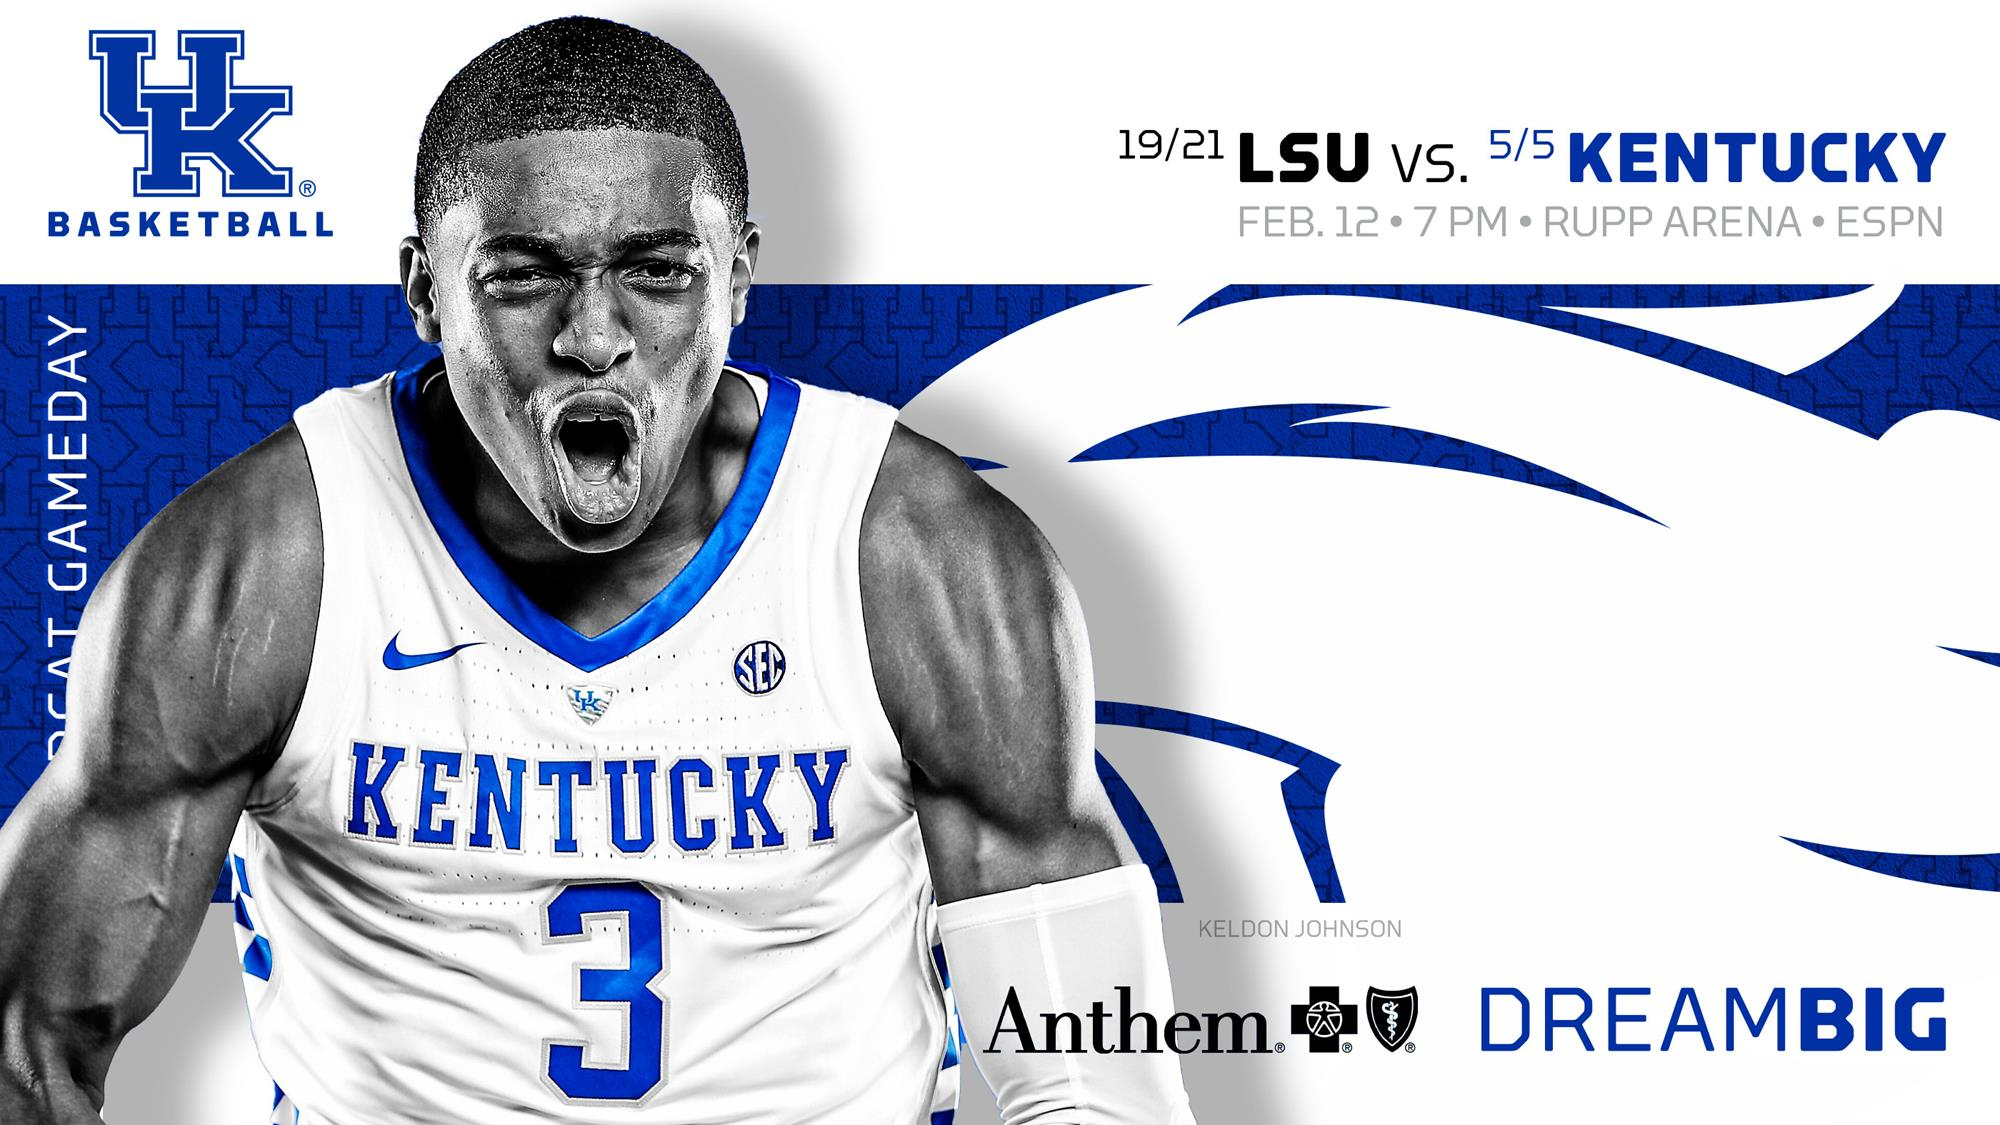 UK Tipping Off Toughest Stretch to Date against LSU